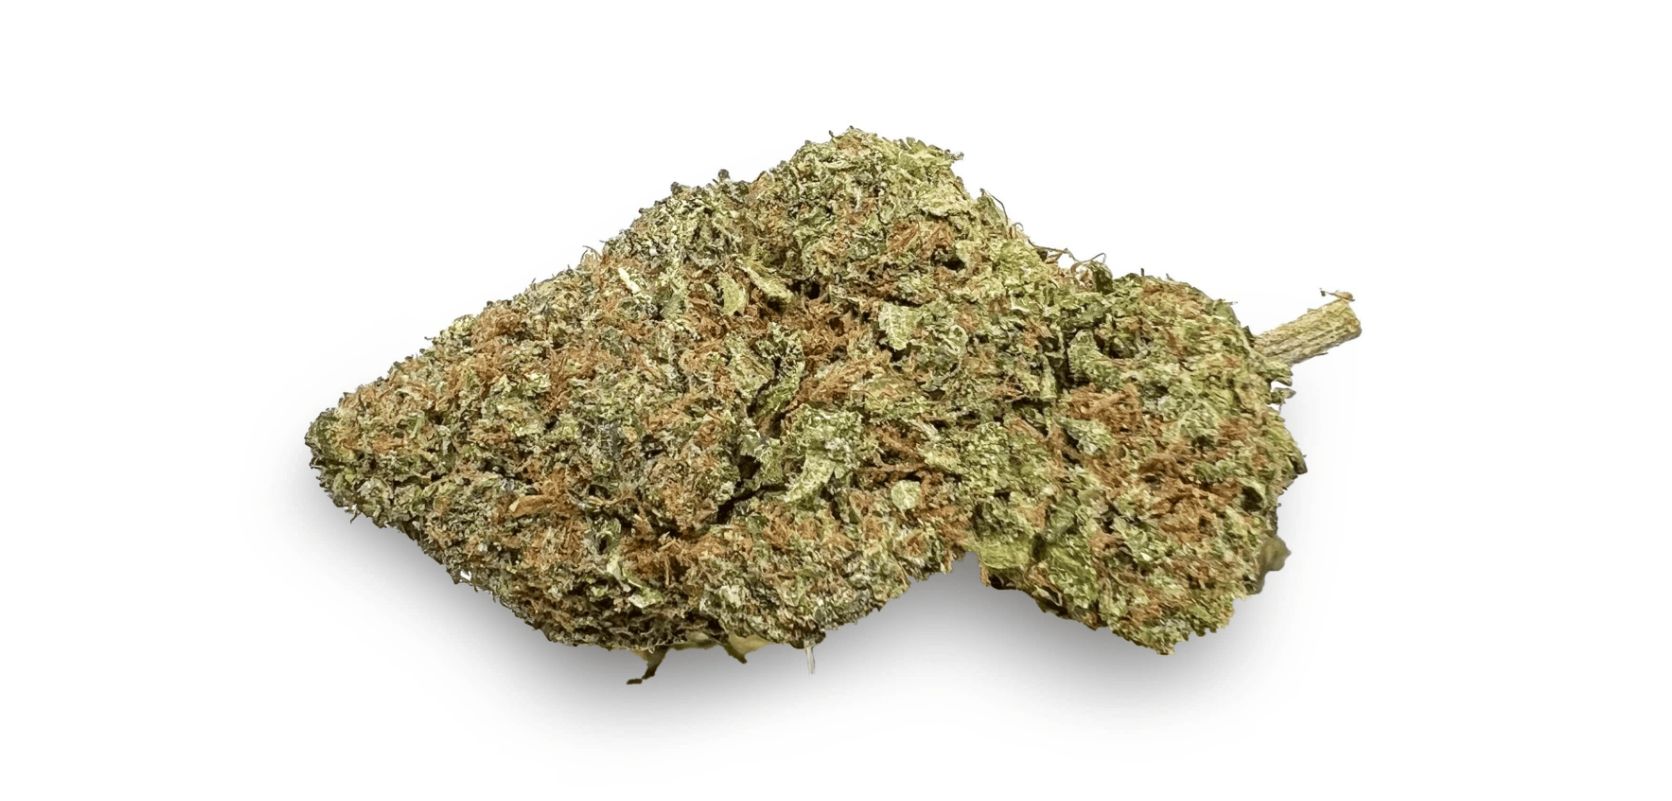 The Grease Monkey weed is a stressed-out and anxious stoner's top choice when it comes to relief. 